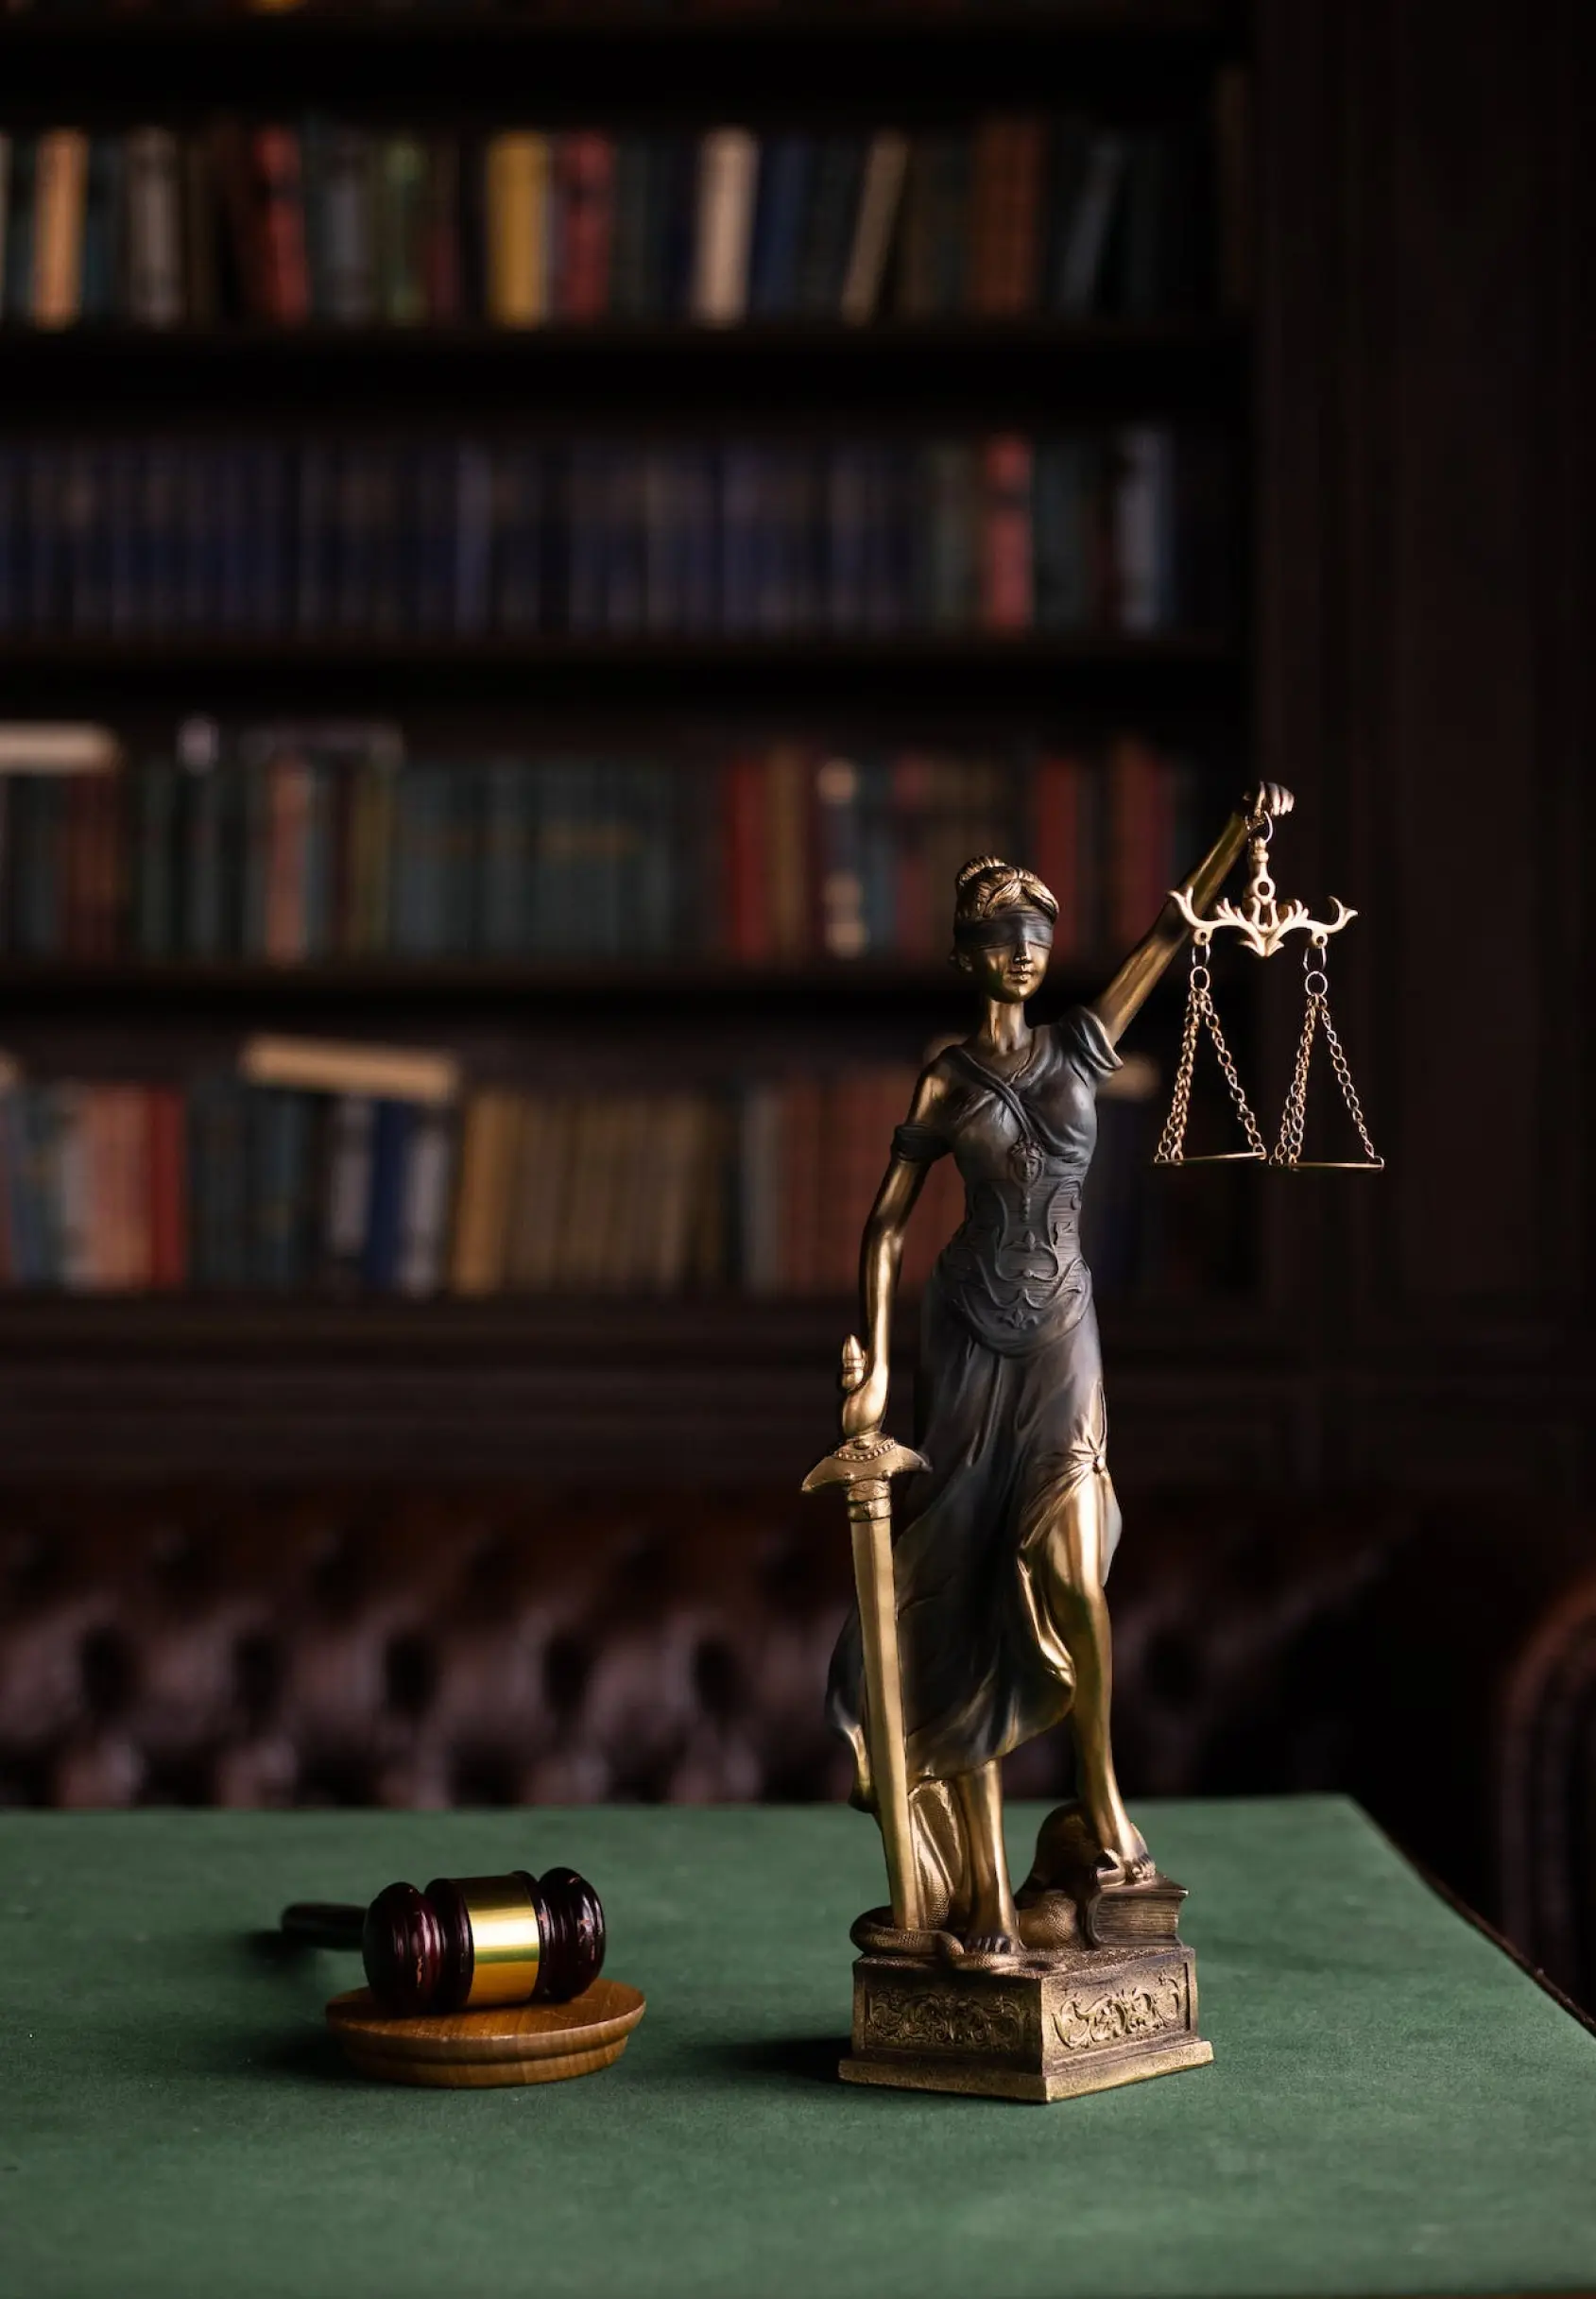 A statue of lady justice on a table in a library.